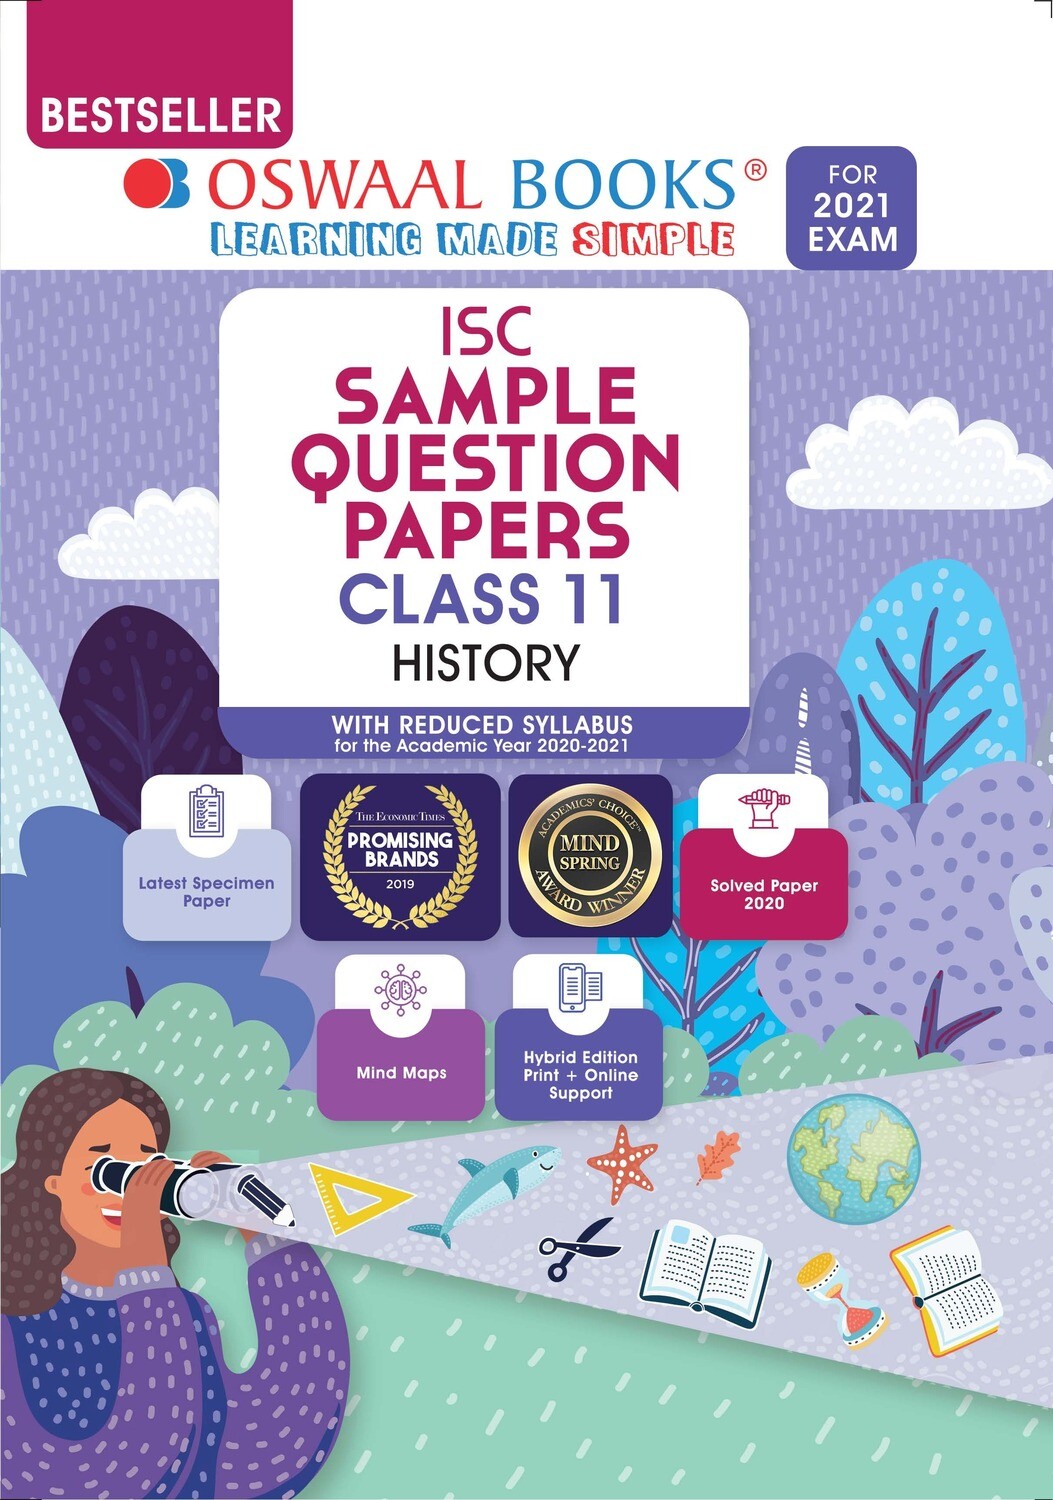 Buy e-book: Oswaal ISC Sample Question Paper Class 11 History (For 2021 Exam): 9789354231636